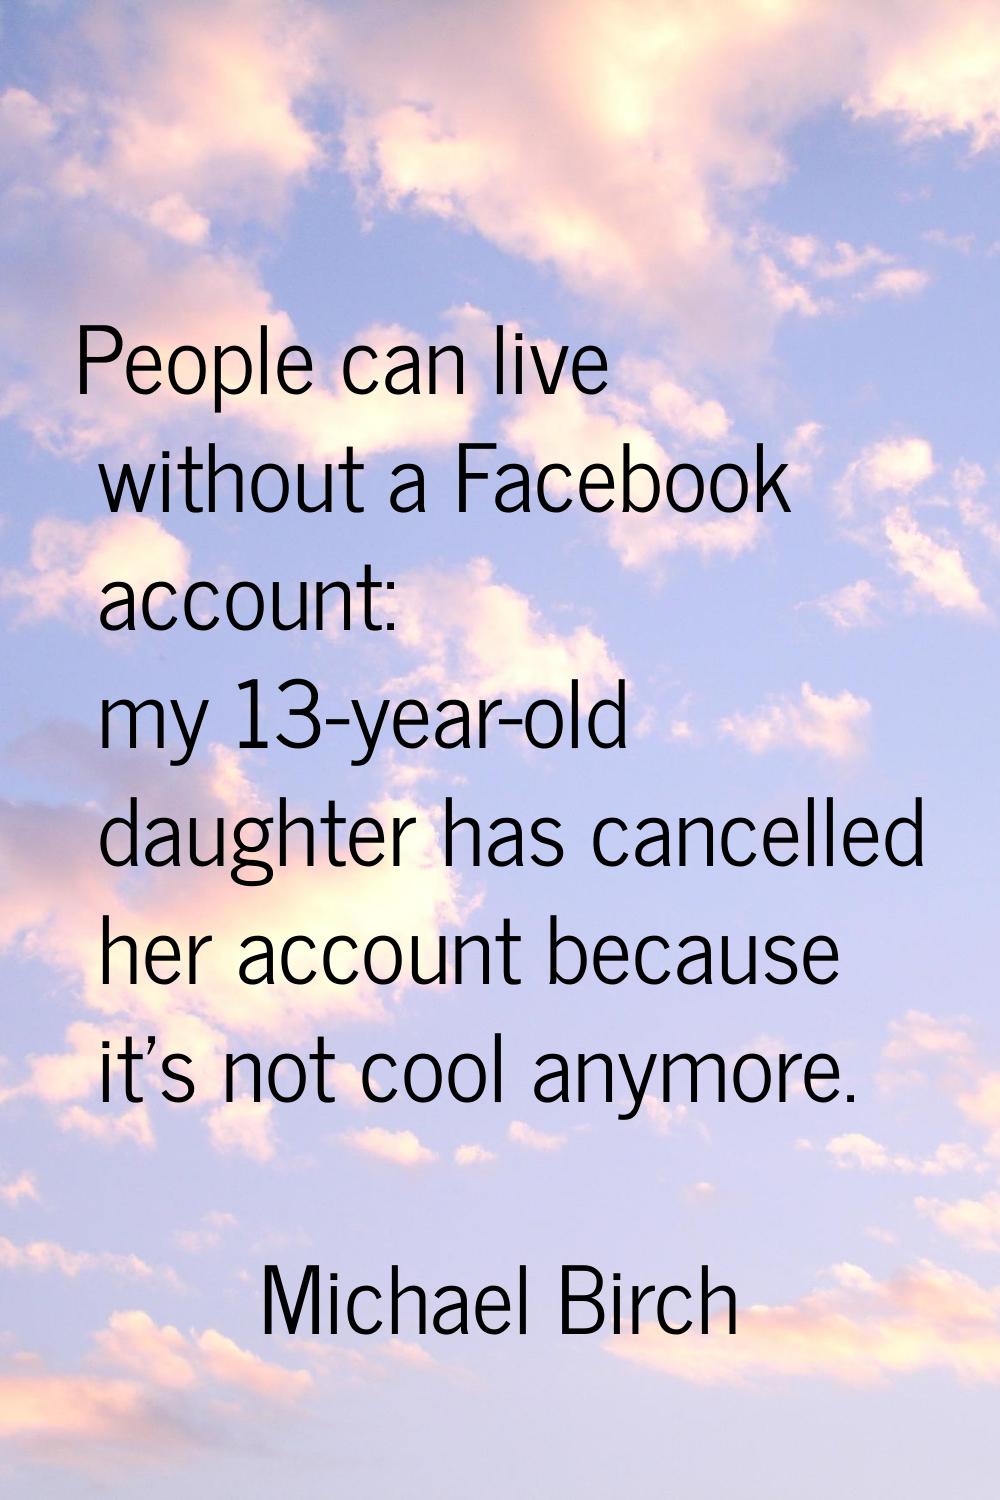 People can live without a Facebook account: my 13-year-old daughter has cancelled her account becau